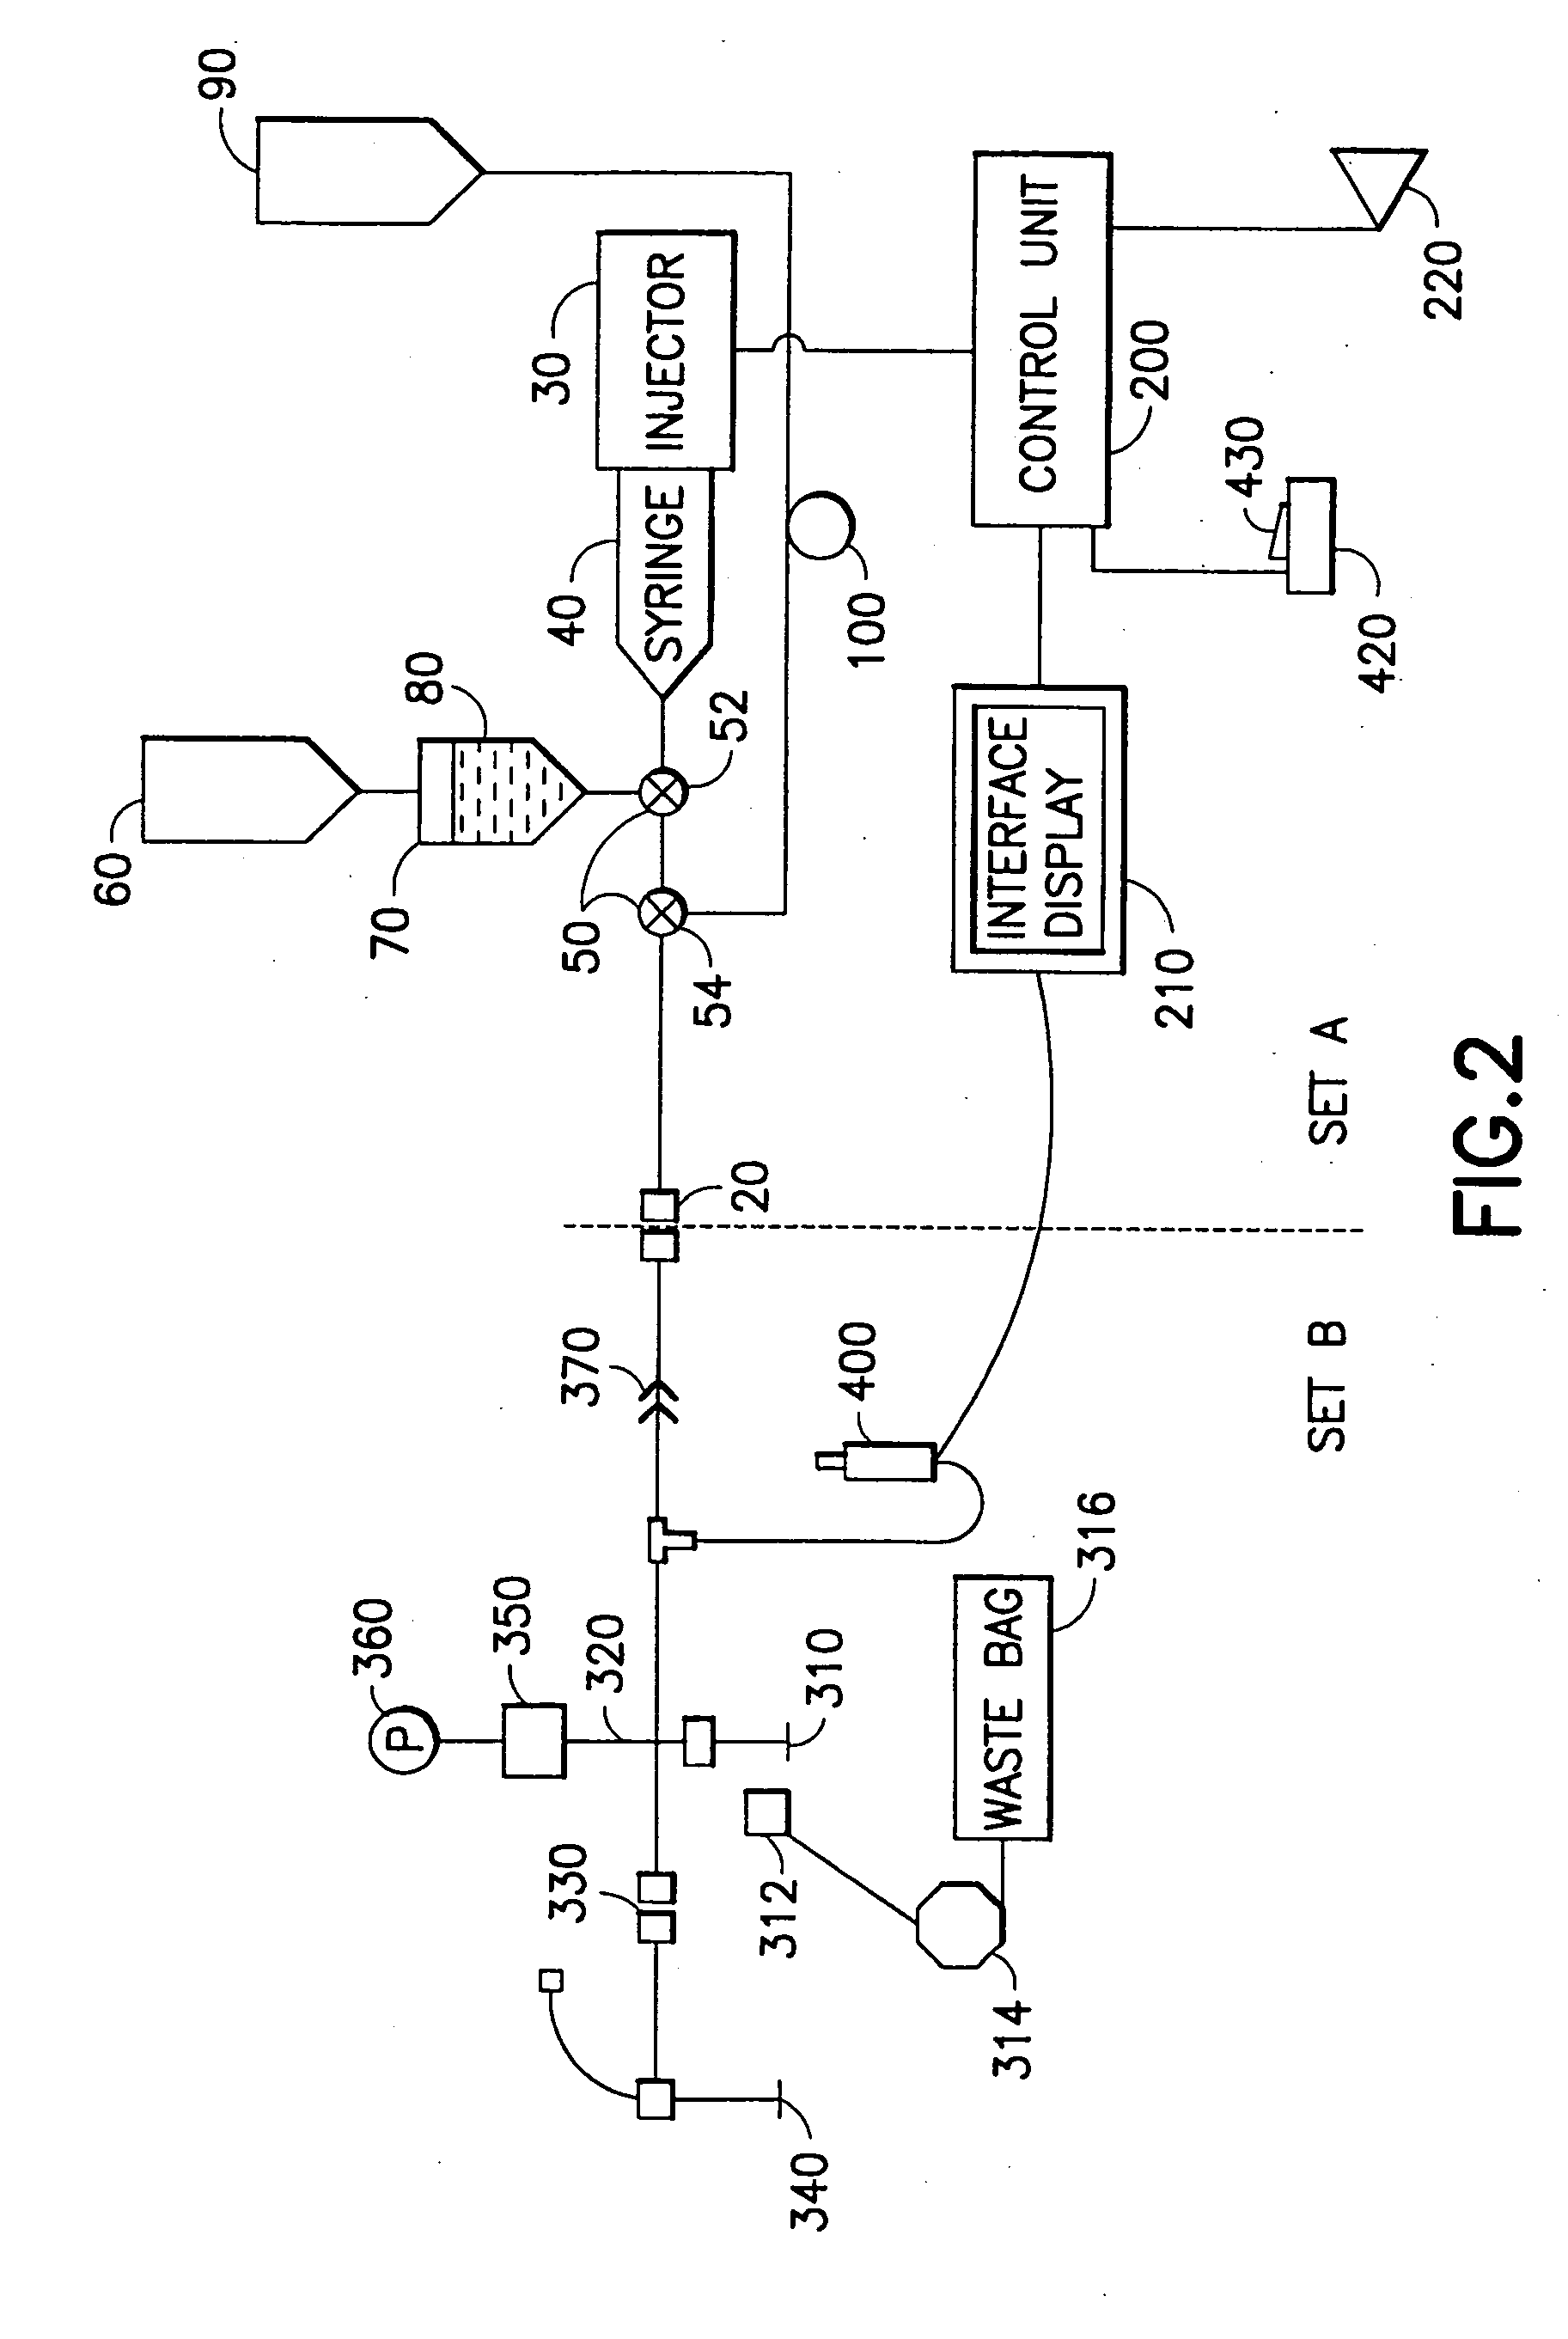 Mobile fluid delivery system with detachable pedestal